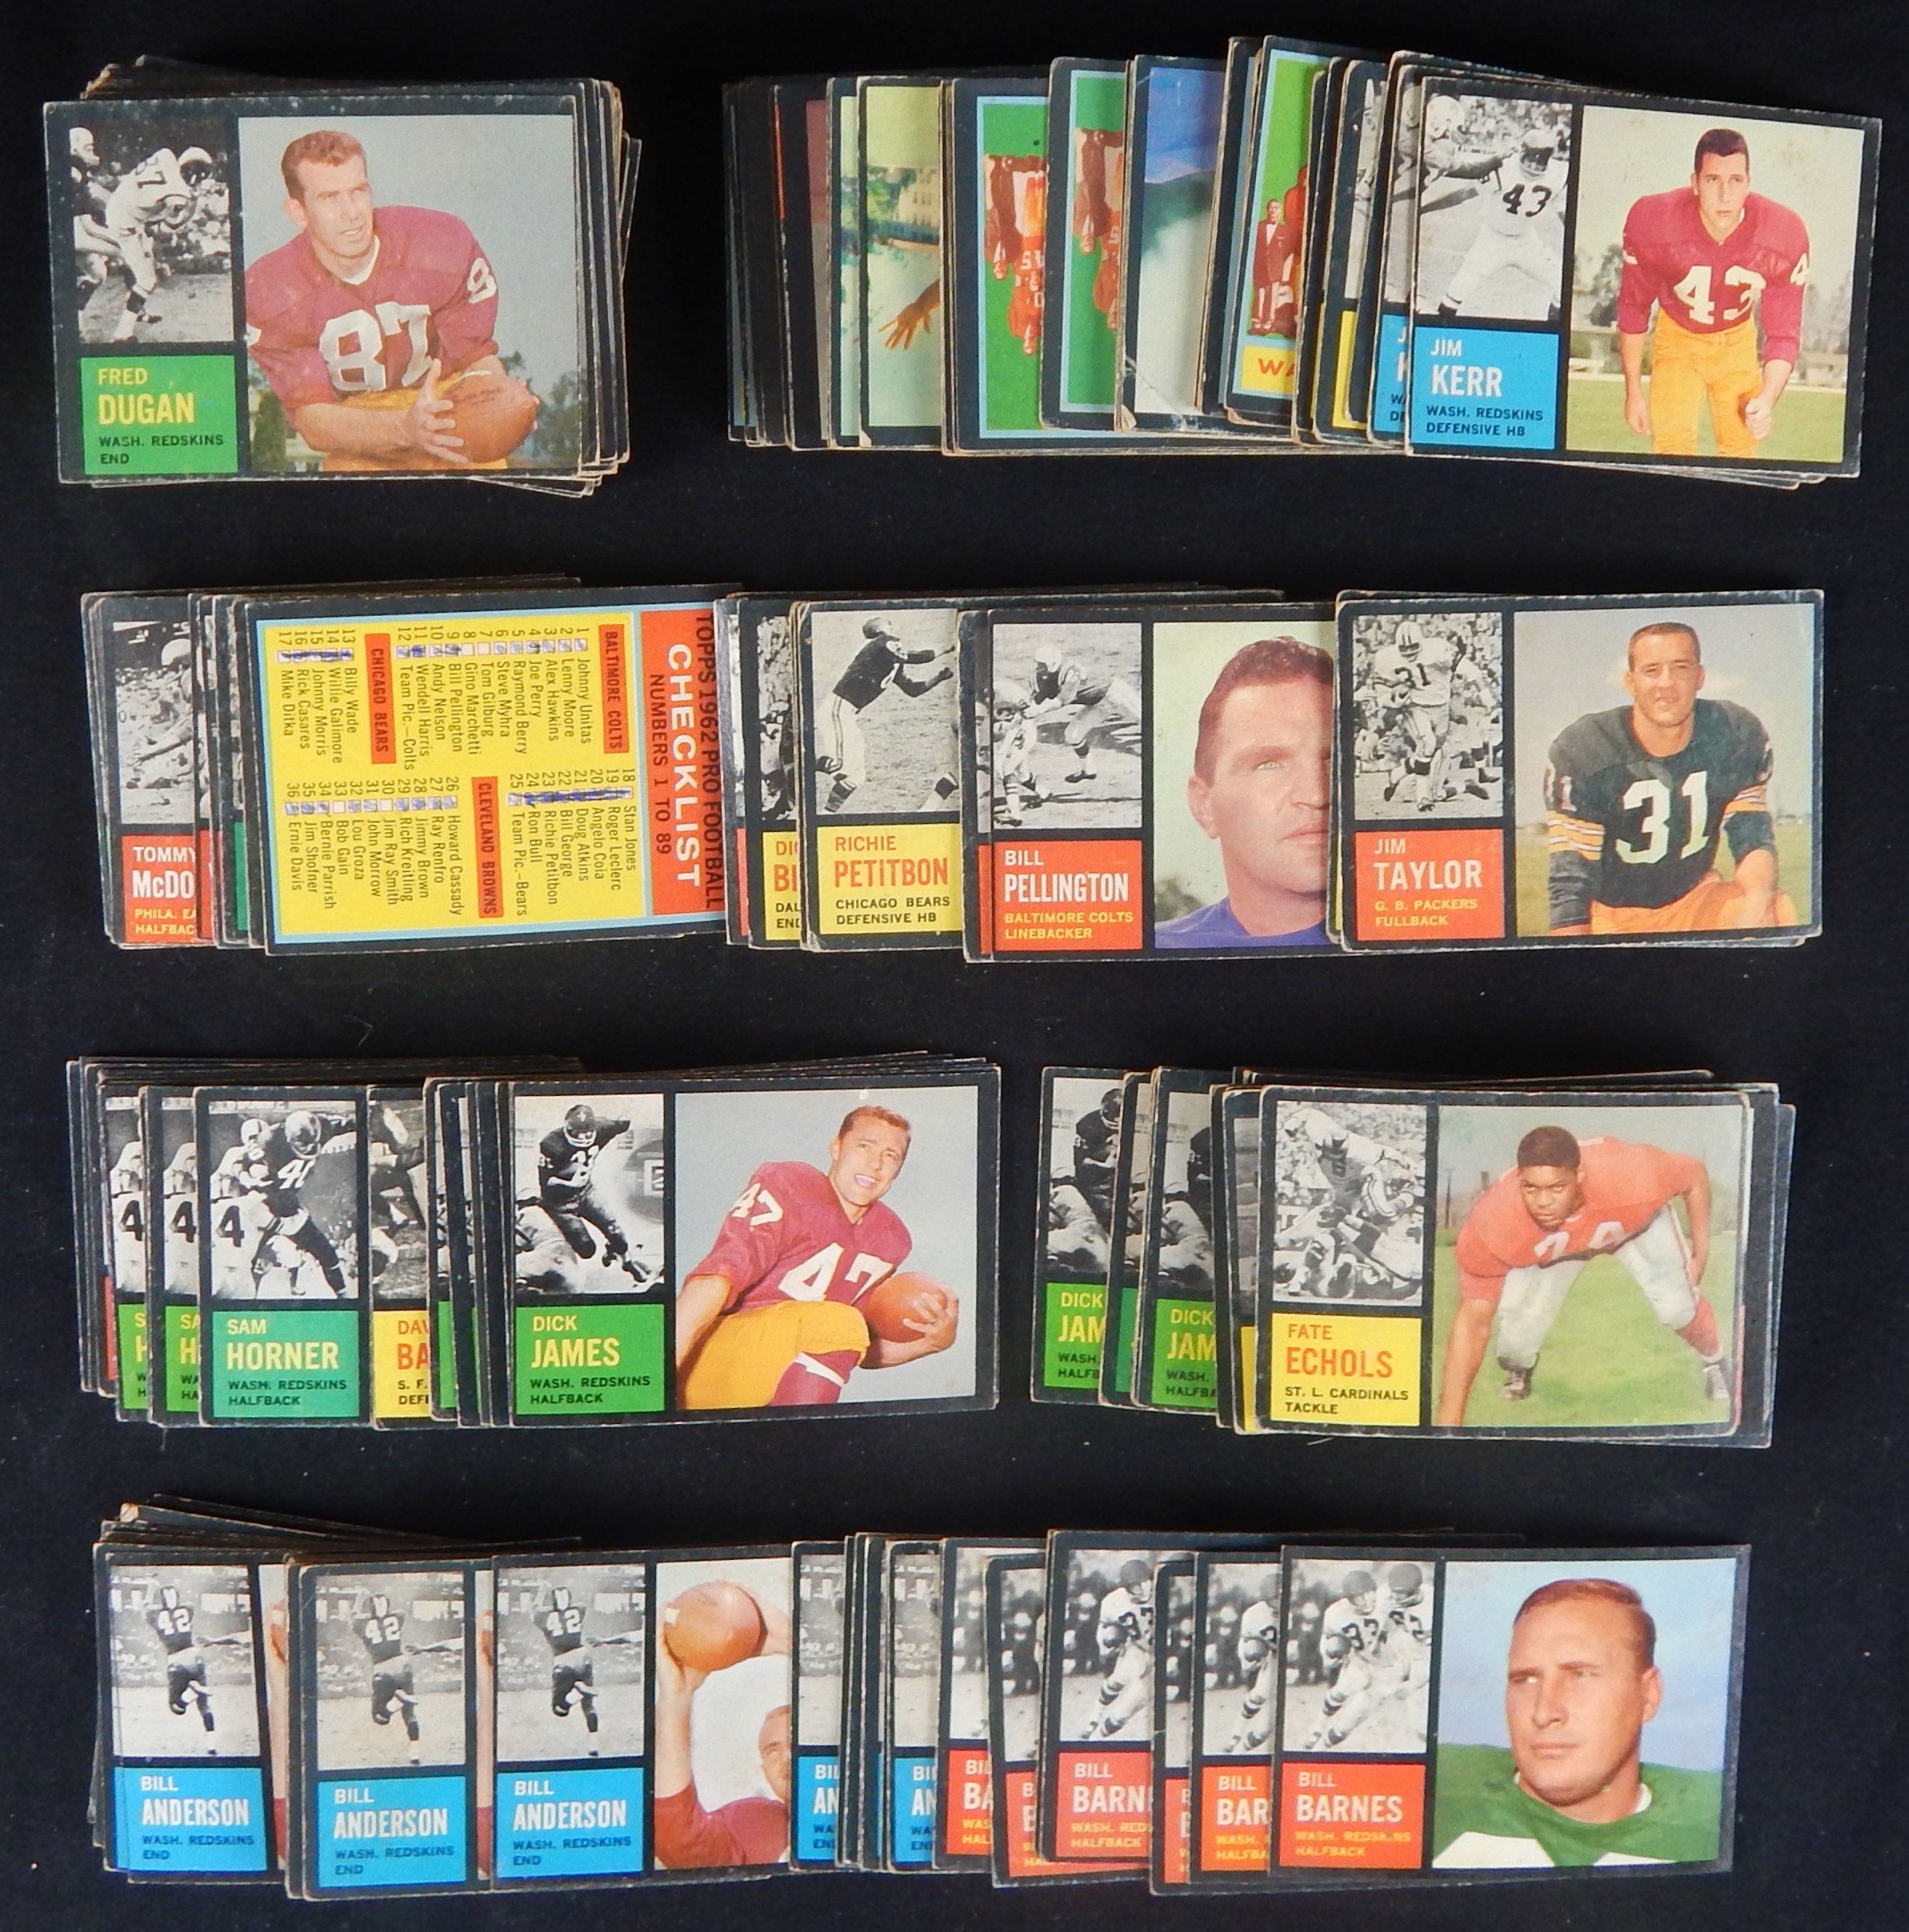 Baseball and Trading Cards - 1962 Topps Football Lot of 250 Cards